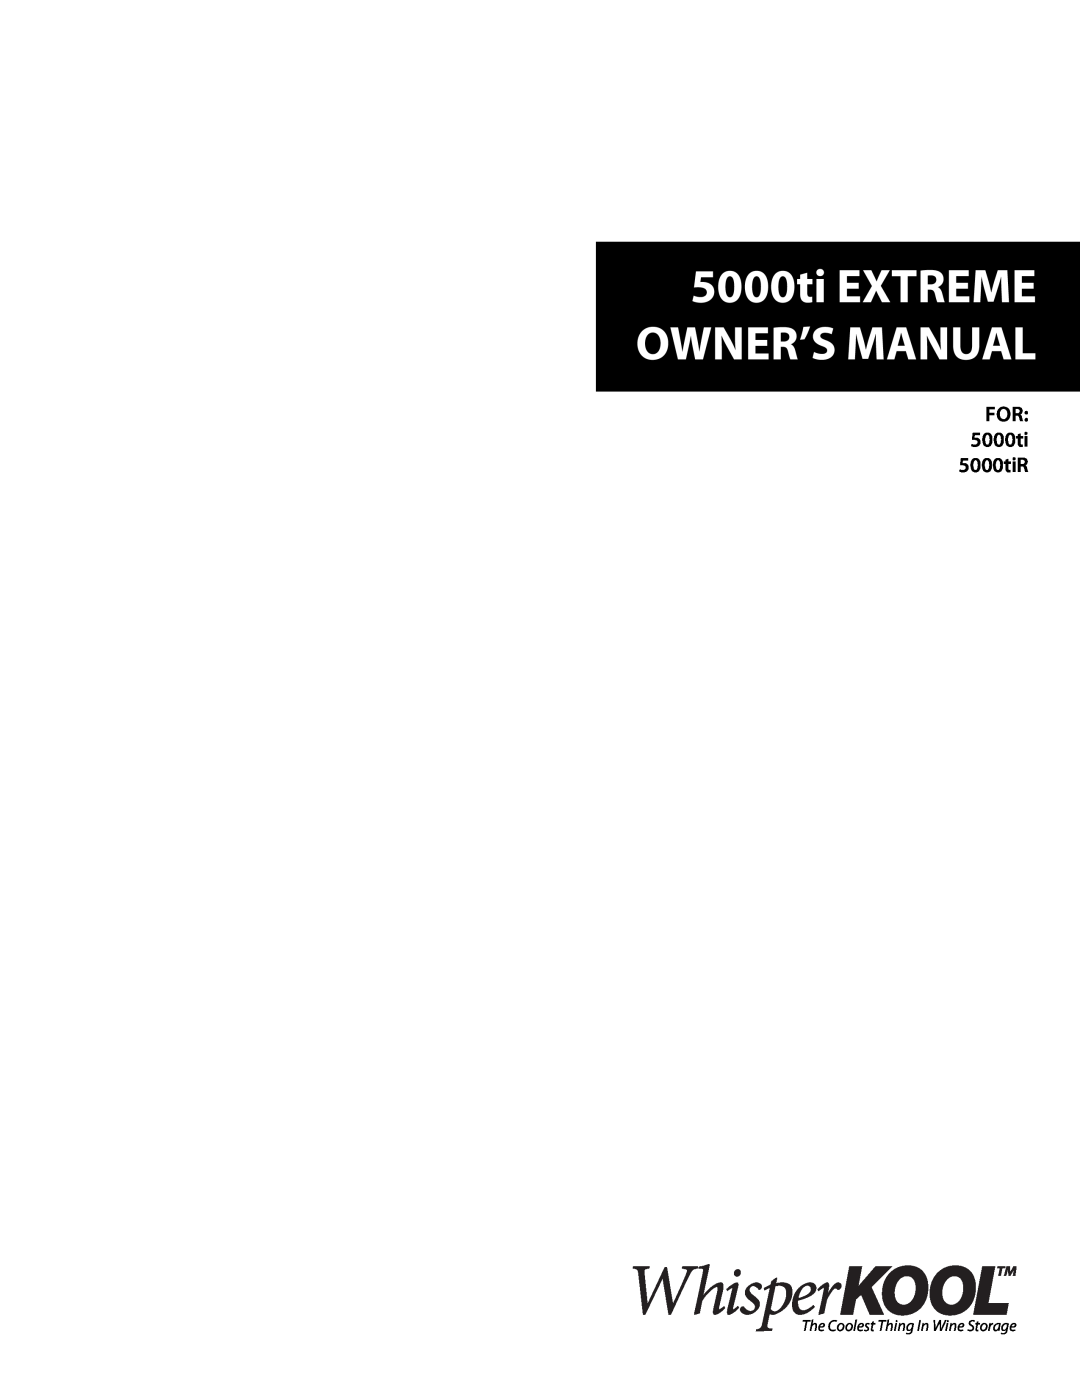 WhisperKool 5000TI owner manual For 5000ti 5000tiR, 5000ti EXTREME OWNER’S MANUAL, The Coolest Thing In Wine Storage 